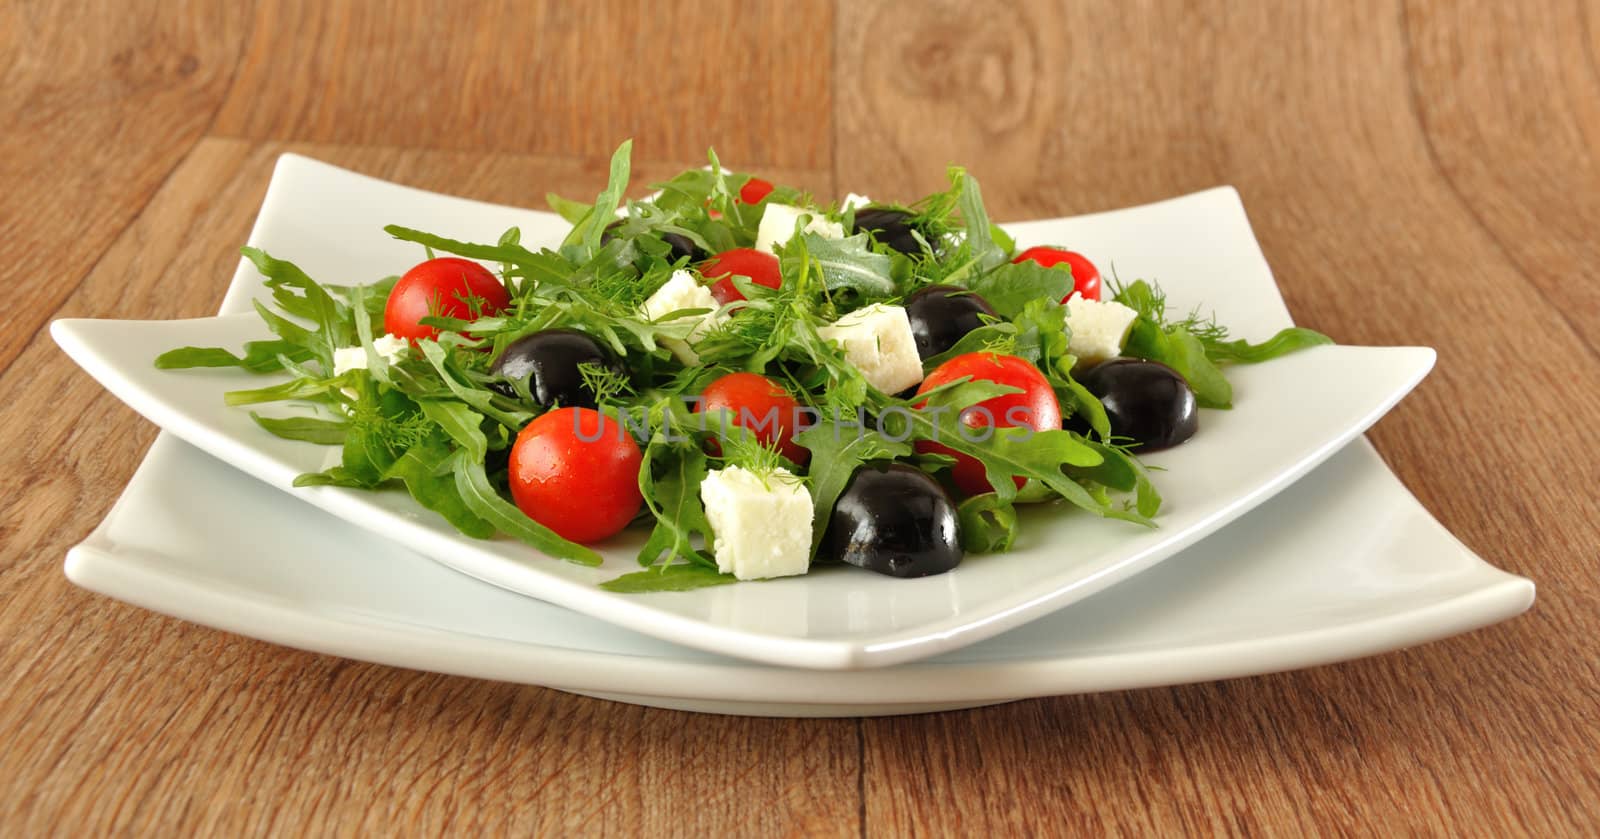 Salad of arugula with cherry tomatoes, slices of cheese and grapes